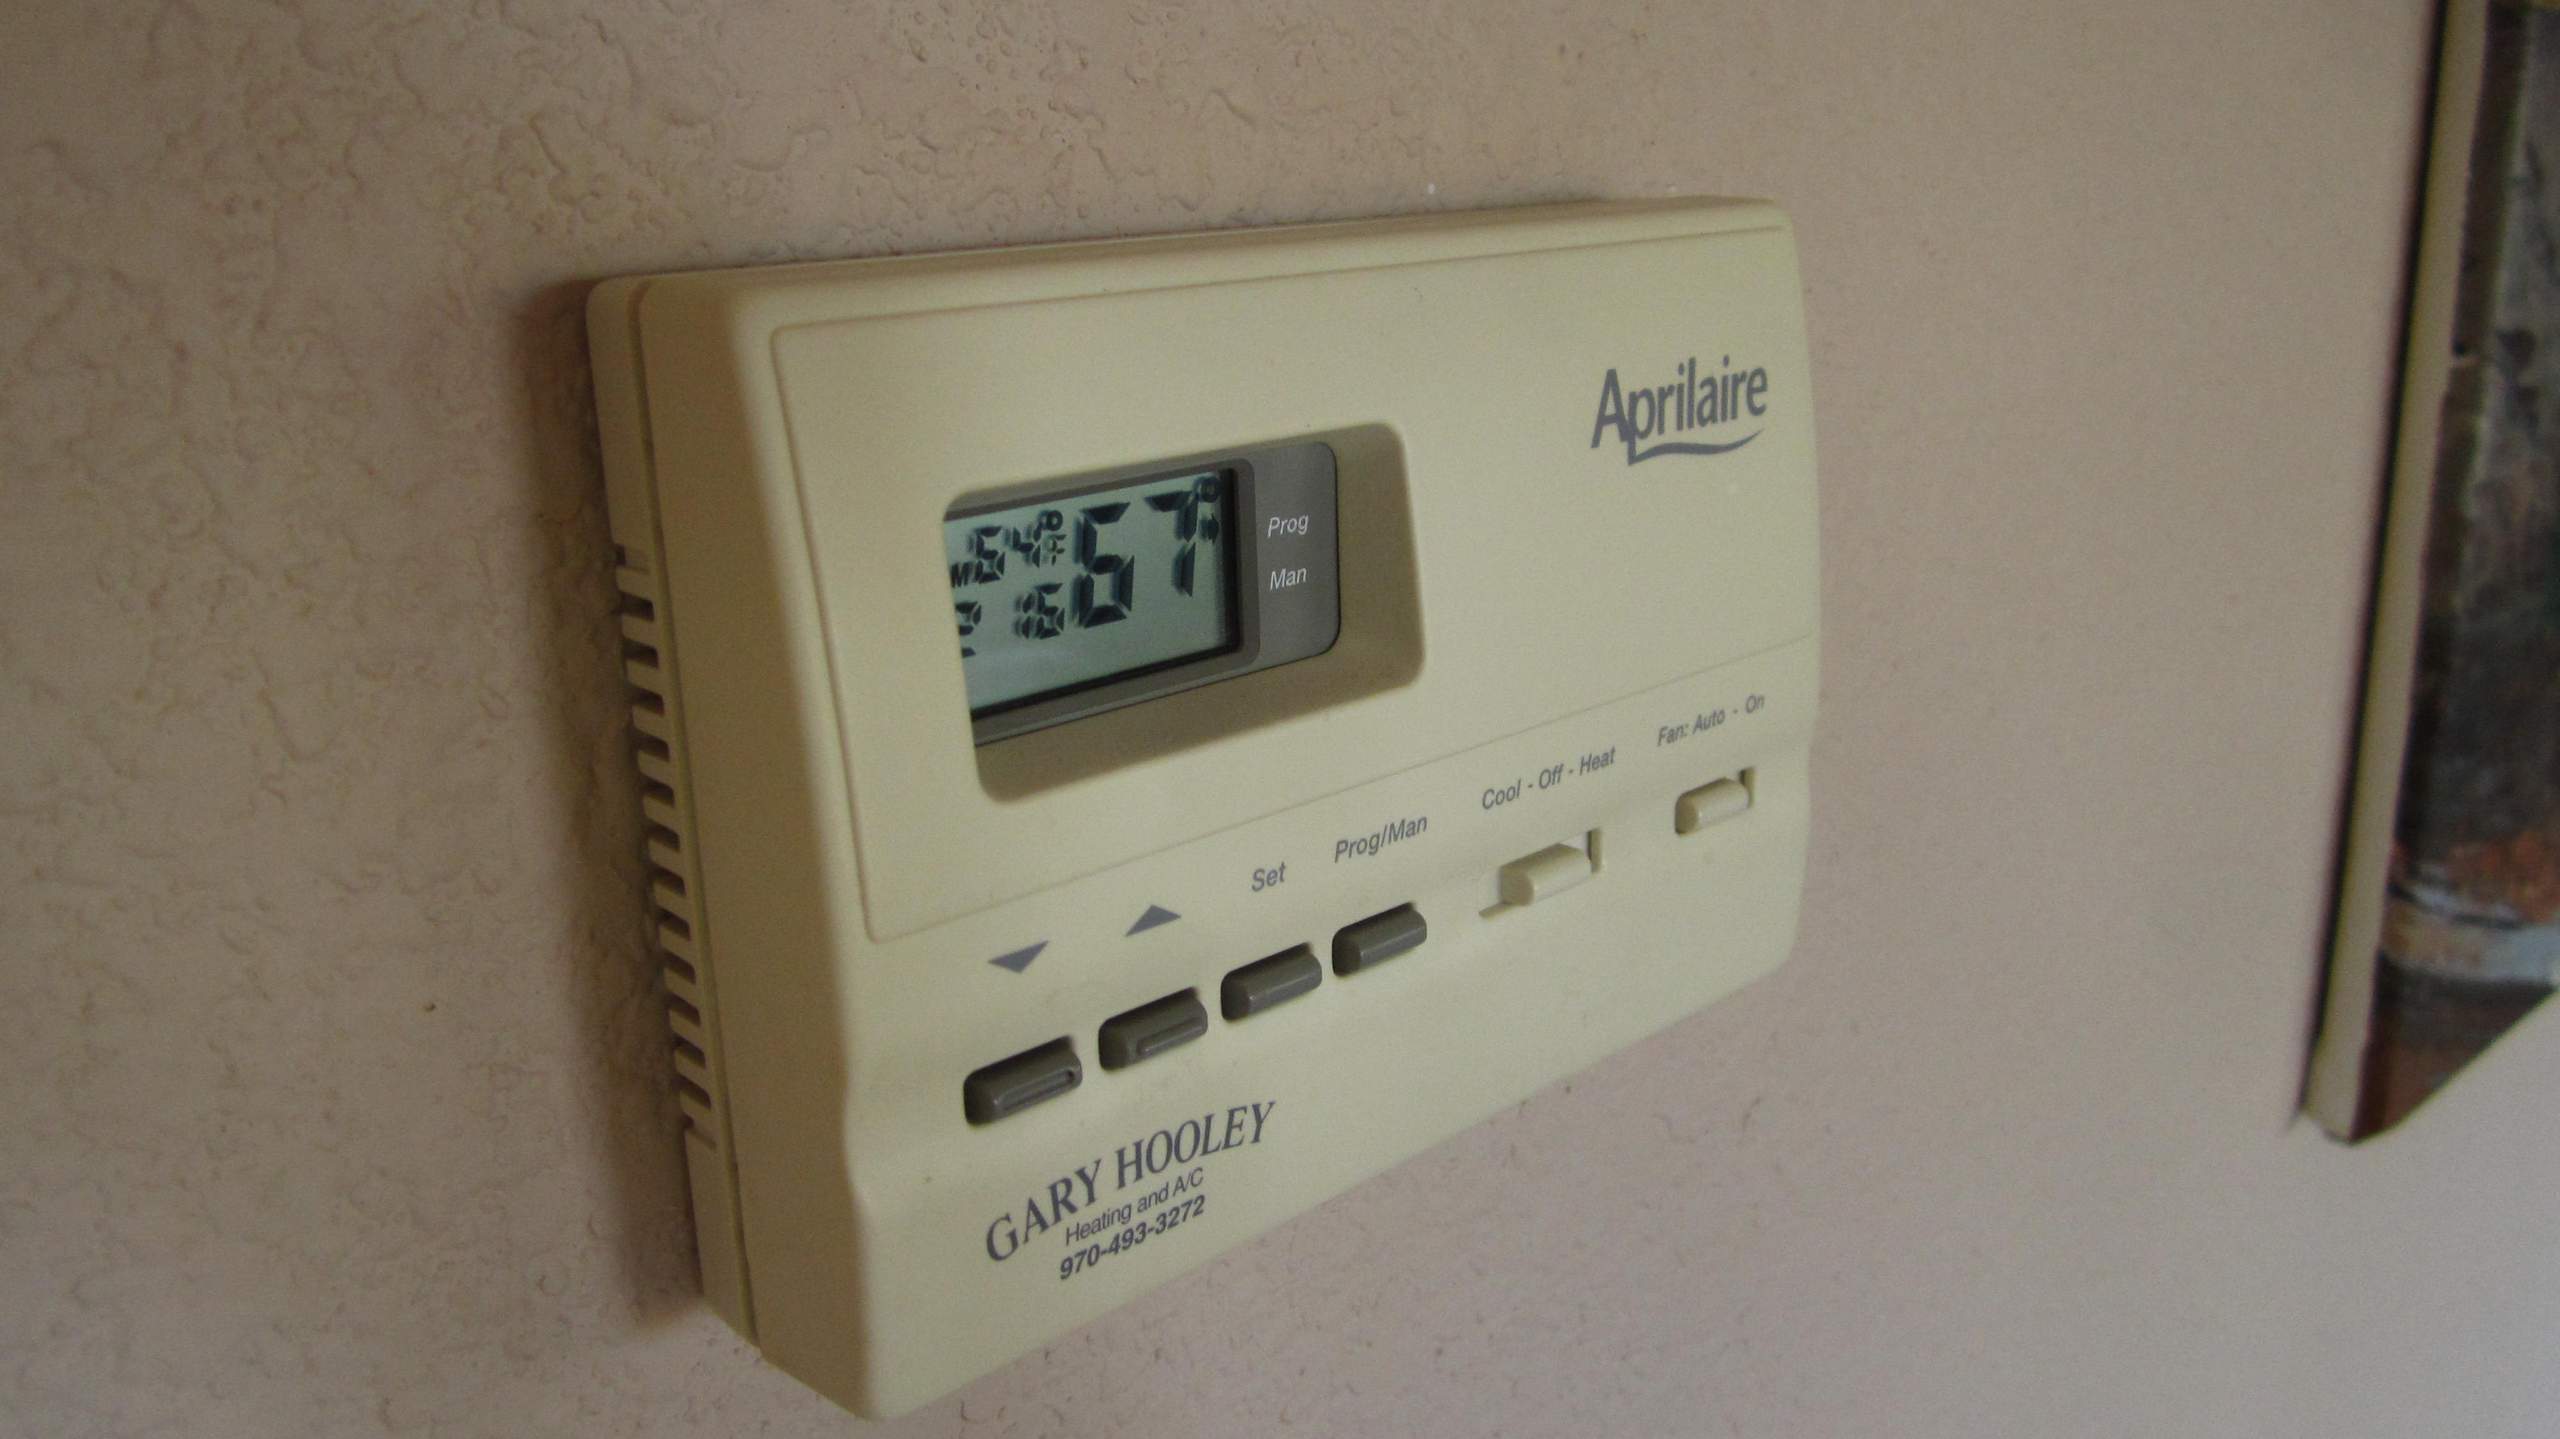 Aprilaire thermostat.